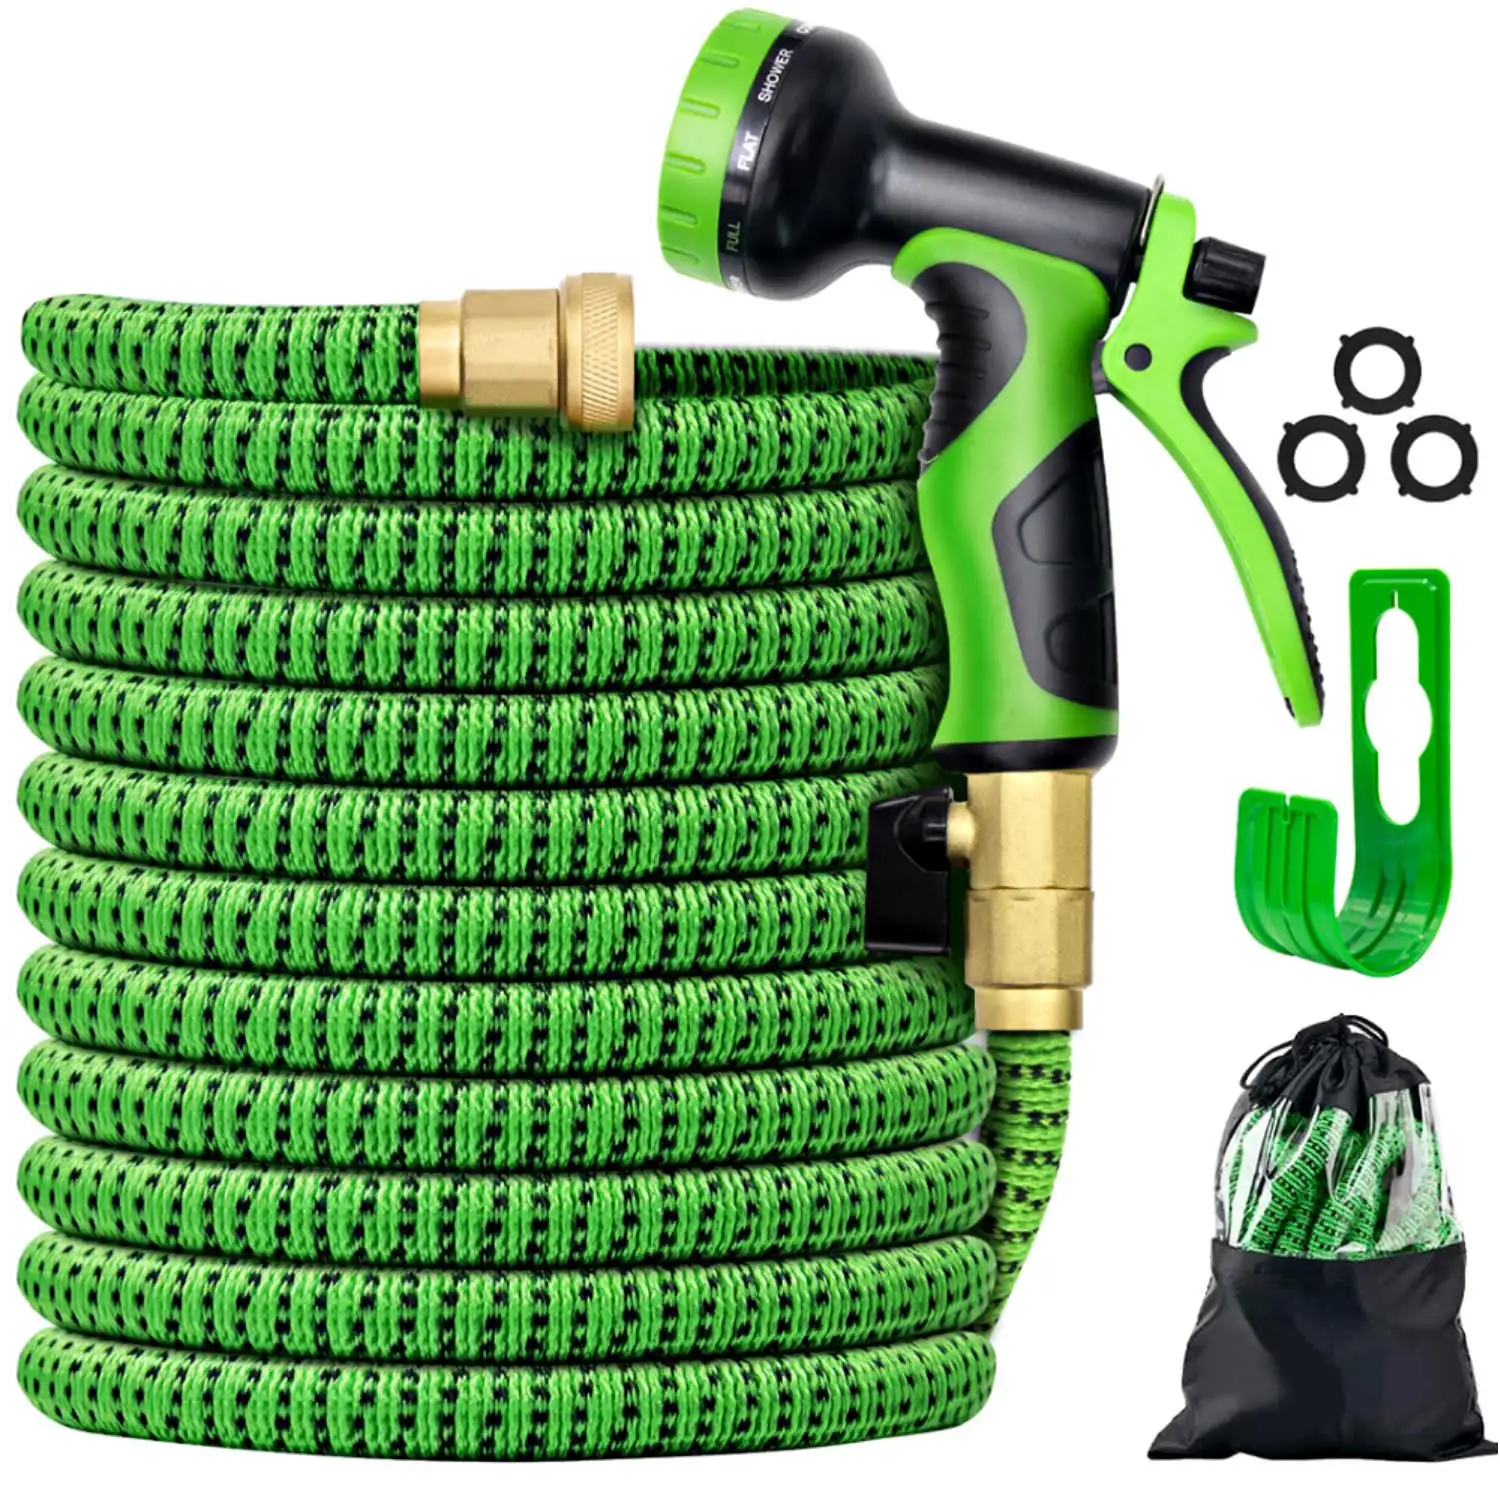 
50 200ft American Expandable Garden Water Hose with 10 Function Spray Nozzle  (1600251763693)